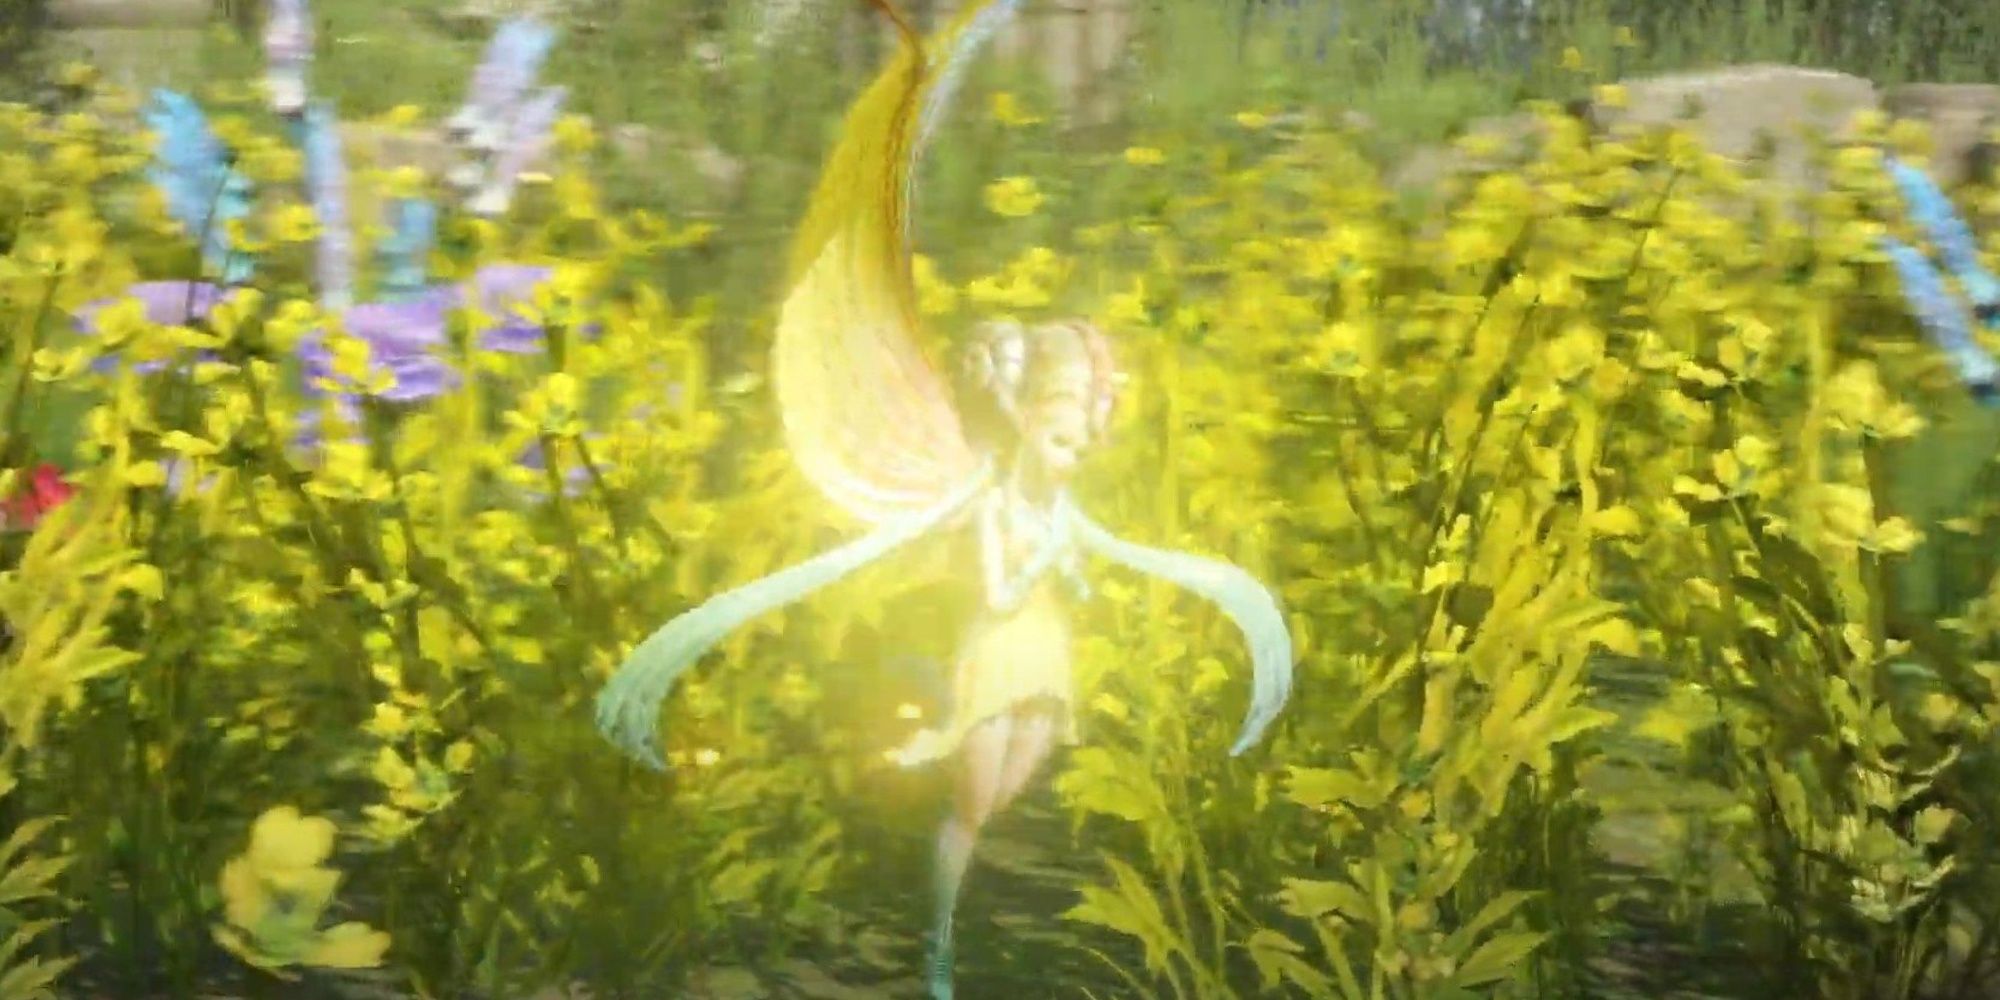 Arone the fairy in Lost Ark's Azure Wind Island is blessing the land after receiving her flowers back from the Buried In Flowers quest.